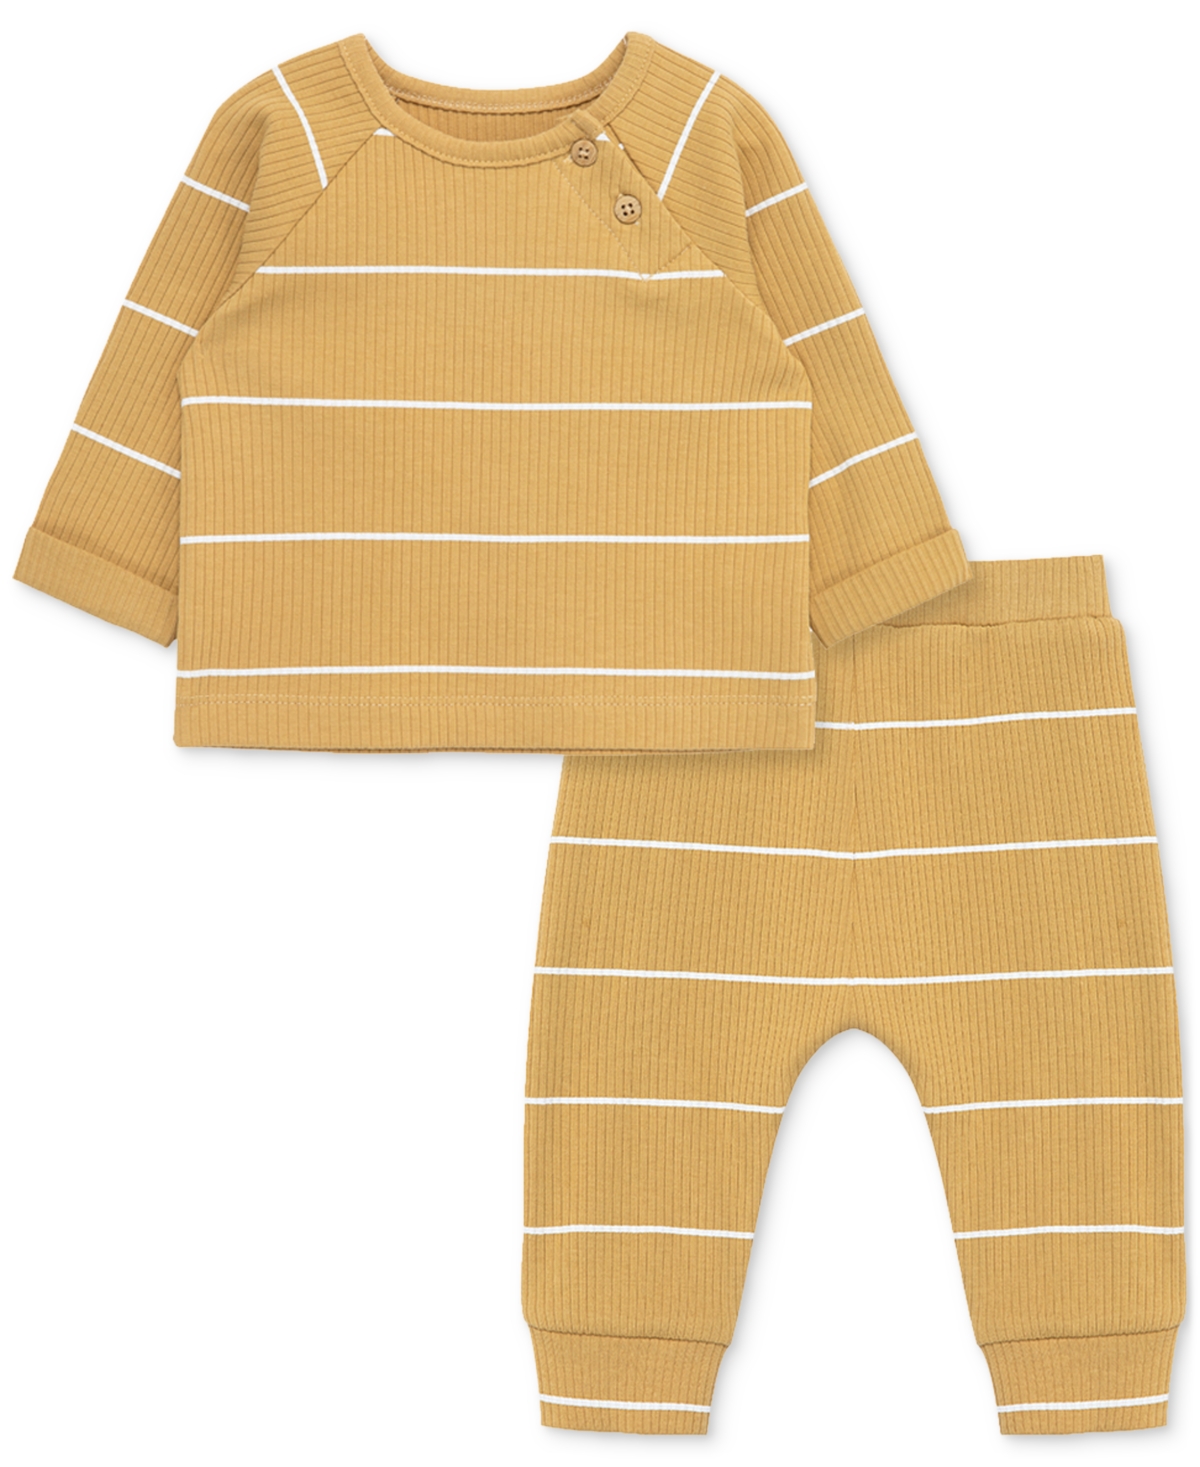 Focus Baby Striped Long Sleeve Top And Pull-on Pants, 2 Piece Set In Sand